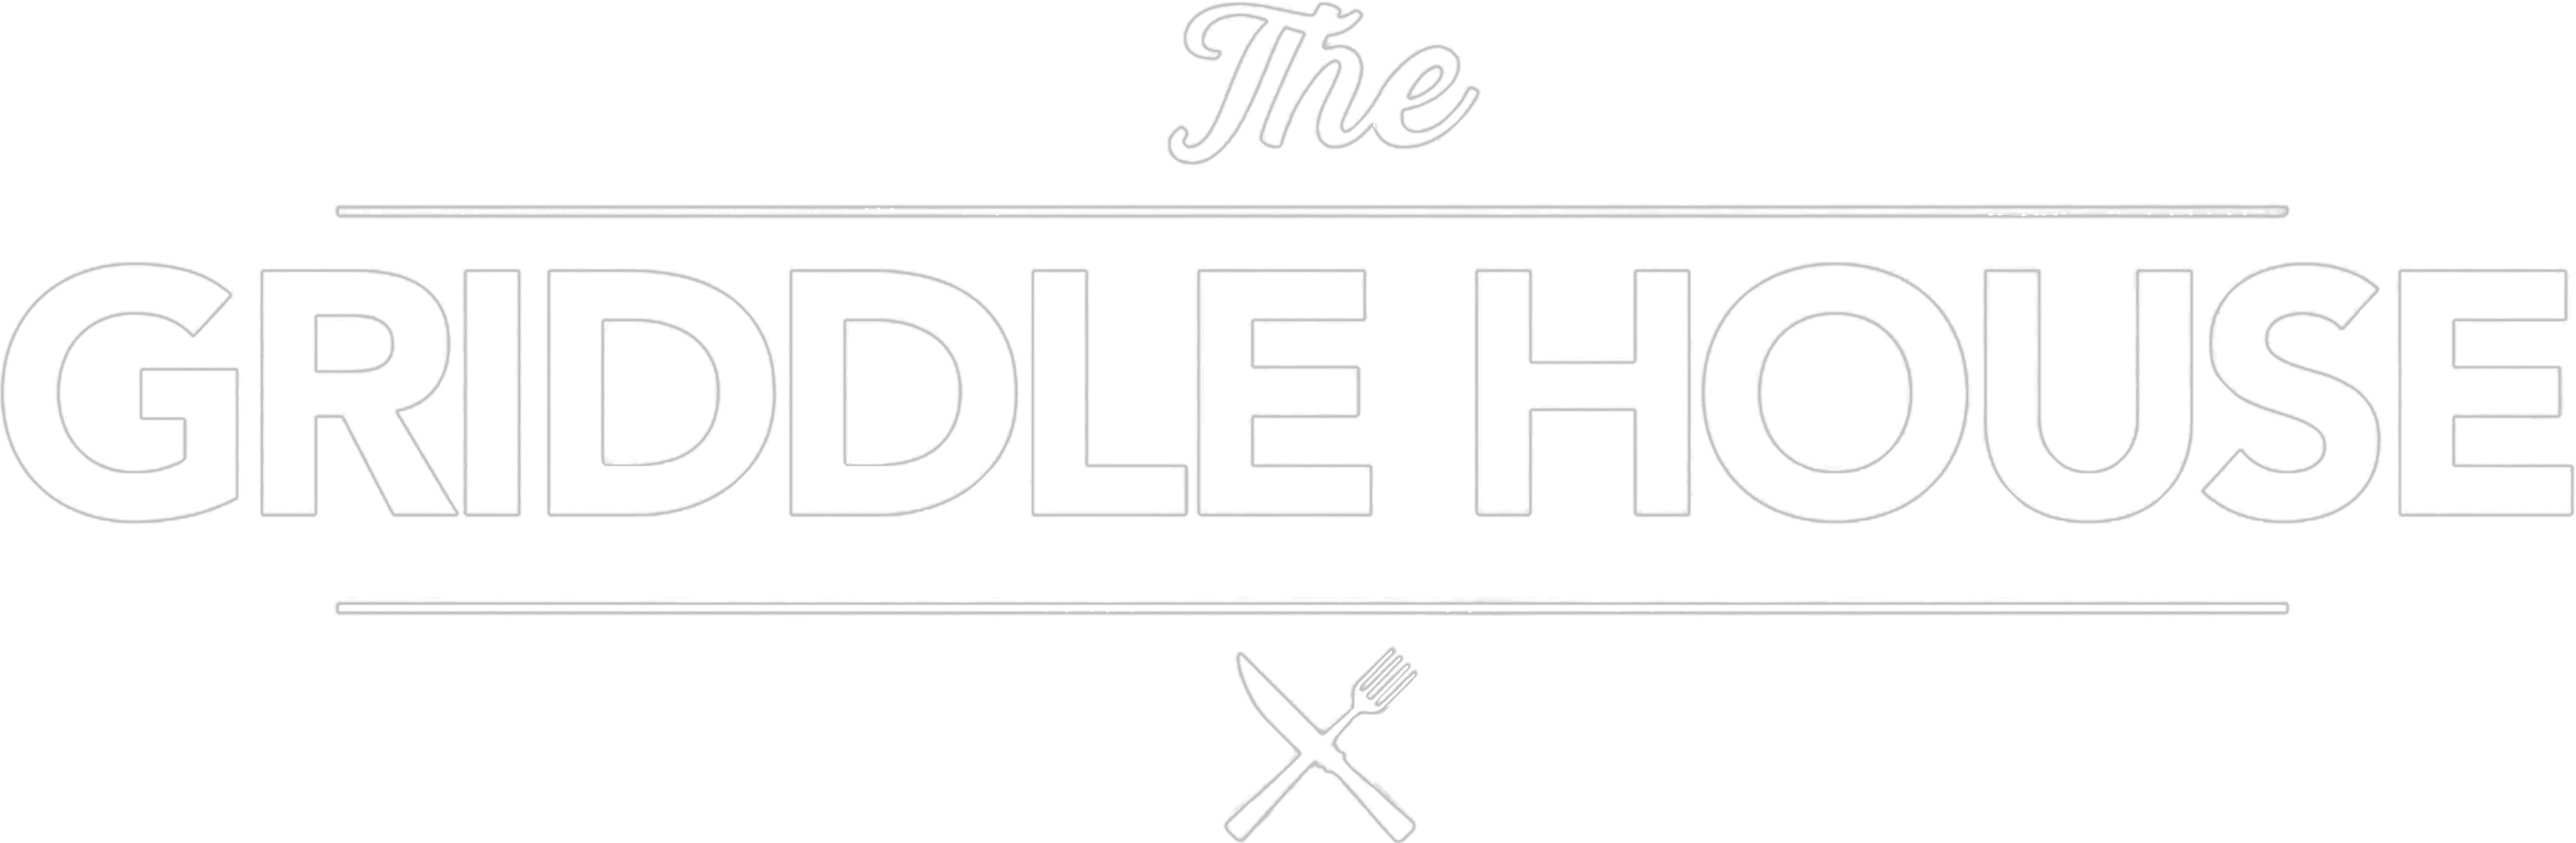 The Griddle House logo